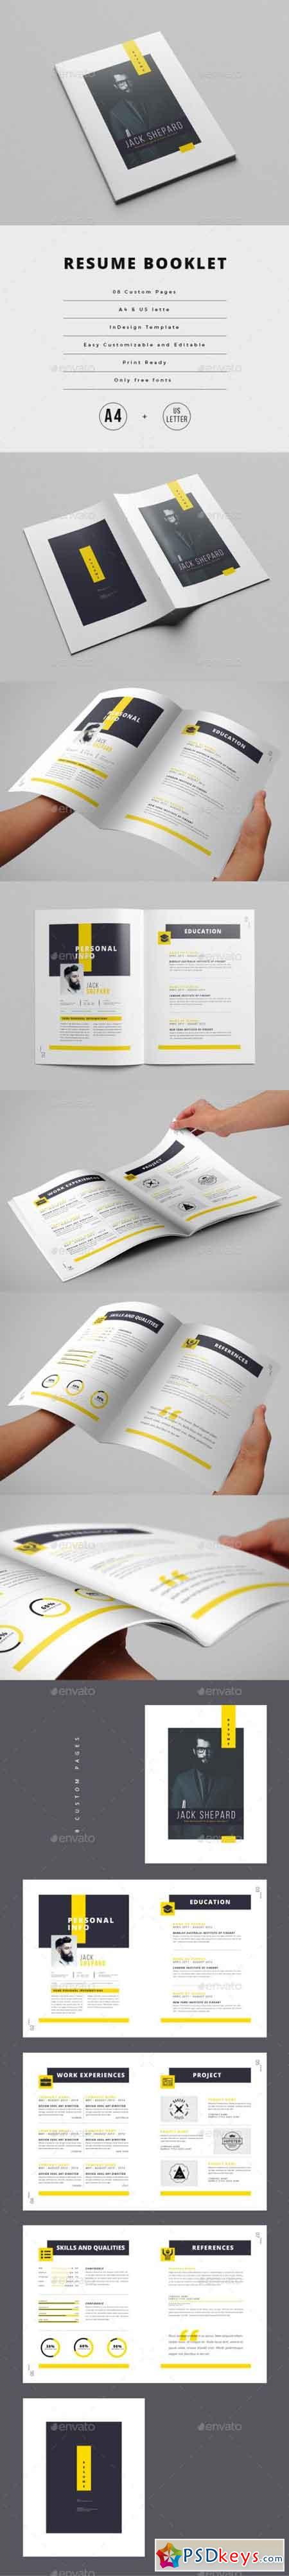 Resume Booklet (8 pages) 22043136